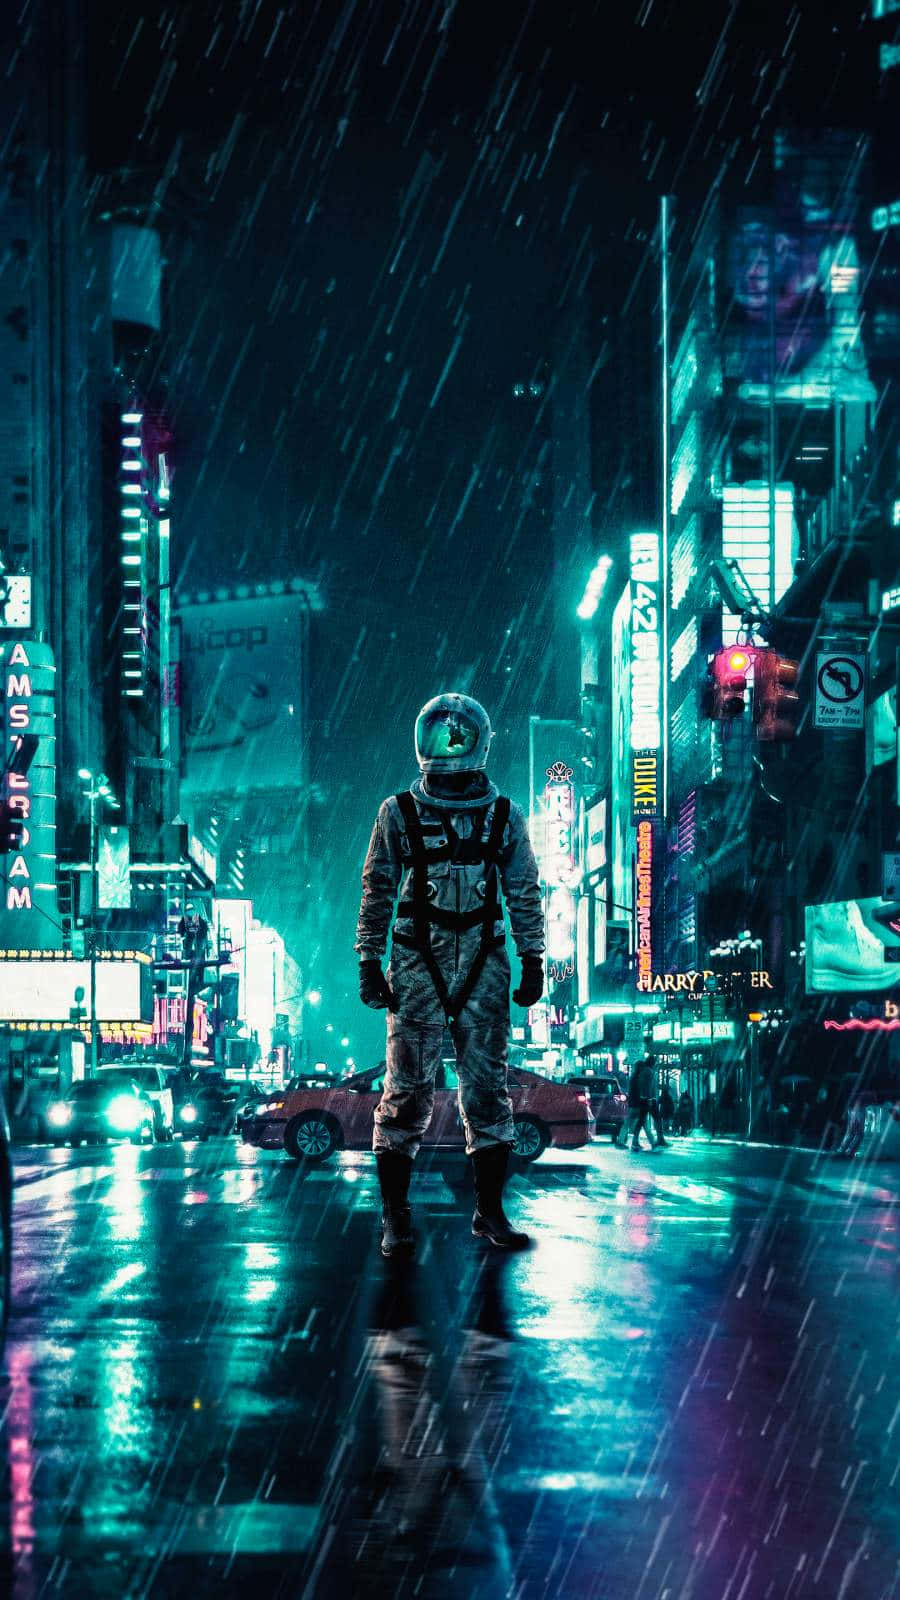 Surrounded by space, an astronaut takes the chance to take a quick call. Wallpaper